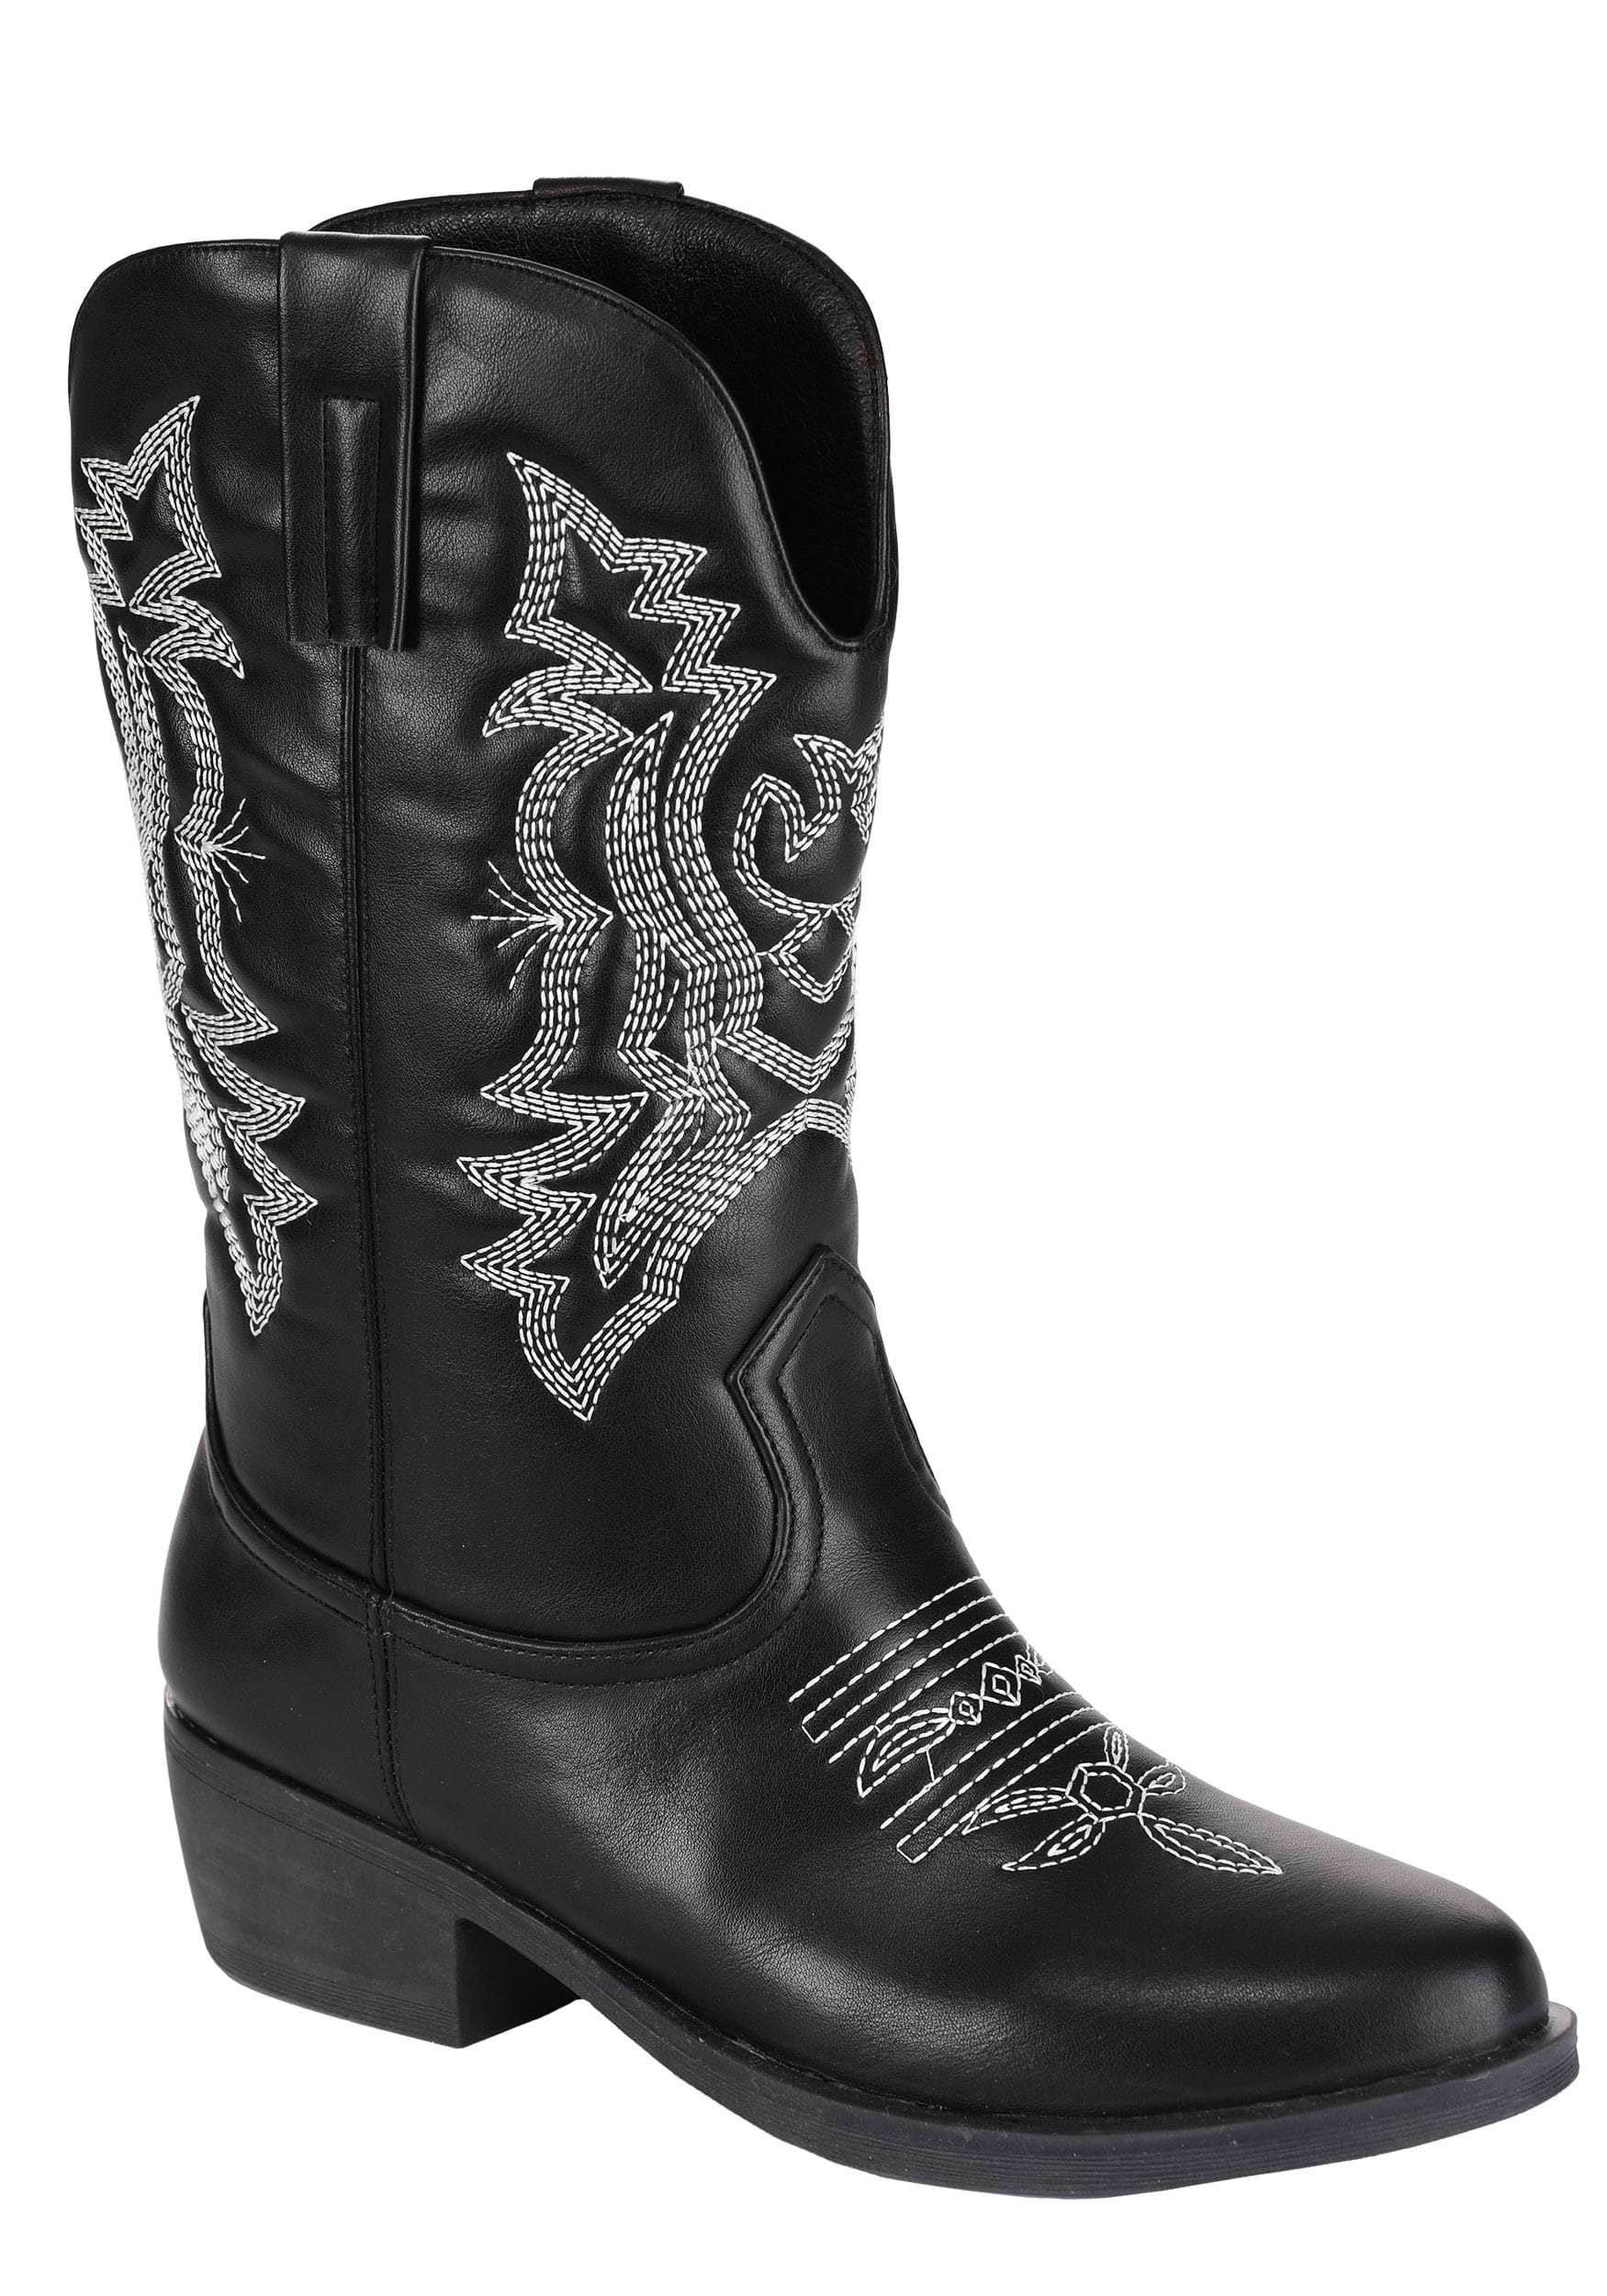 Women's Black Cowgirl Boots